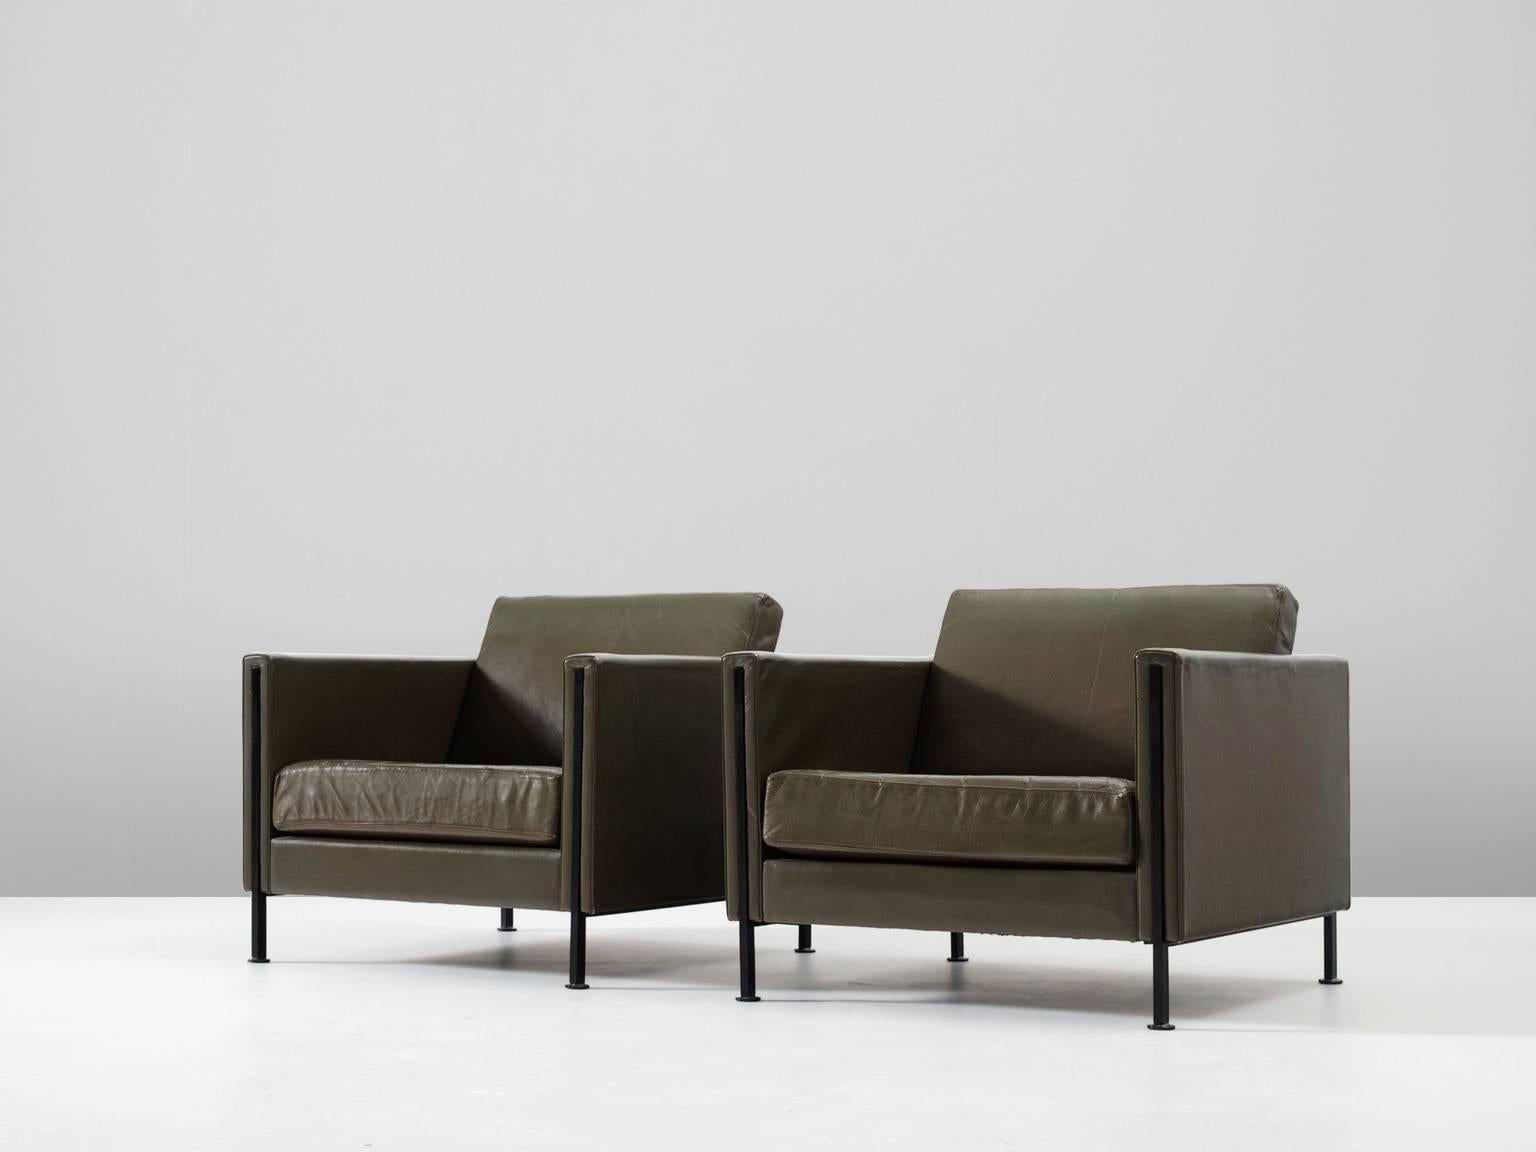 Modern '442/3' sofa's in leather and steel, by Pierre Paulin for Artifort, the Netherlands 1962. 

These comfortable armchairs show elegant black lacquared steel details. The combination of steel and leather gives these lounge chairs a modern and